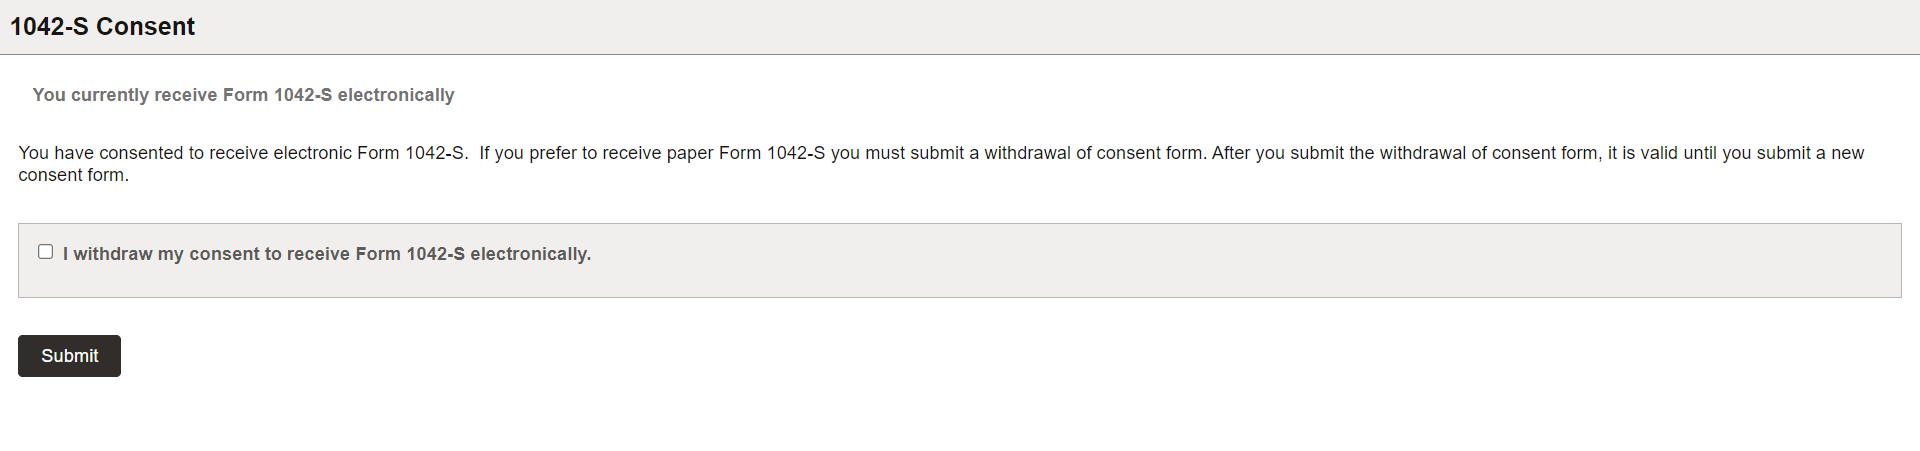 1042-S Consent page (currently receiving electronic form)